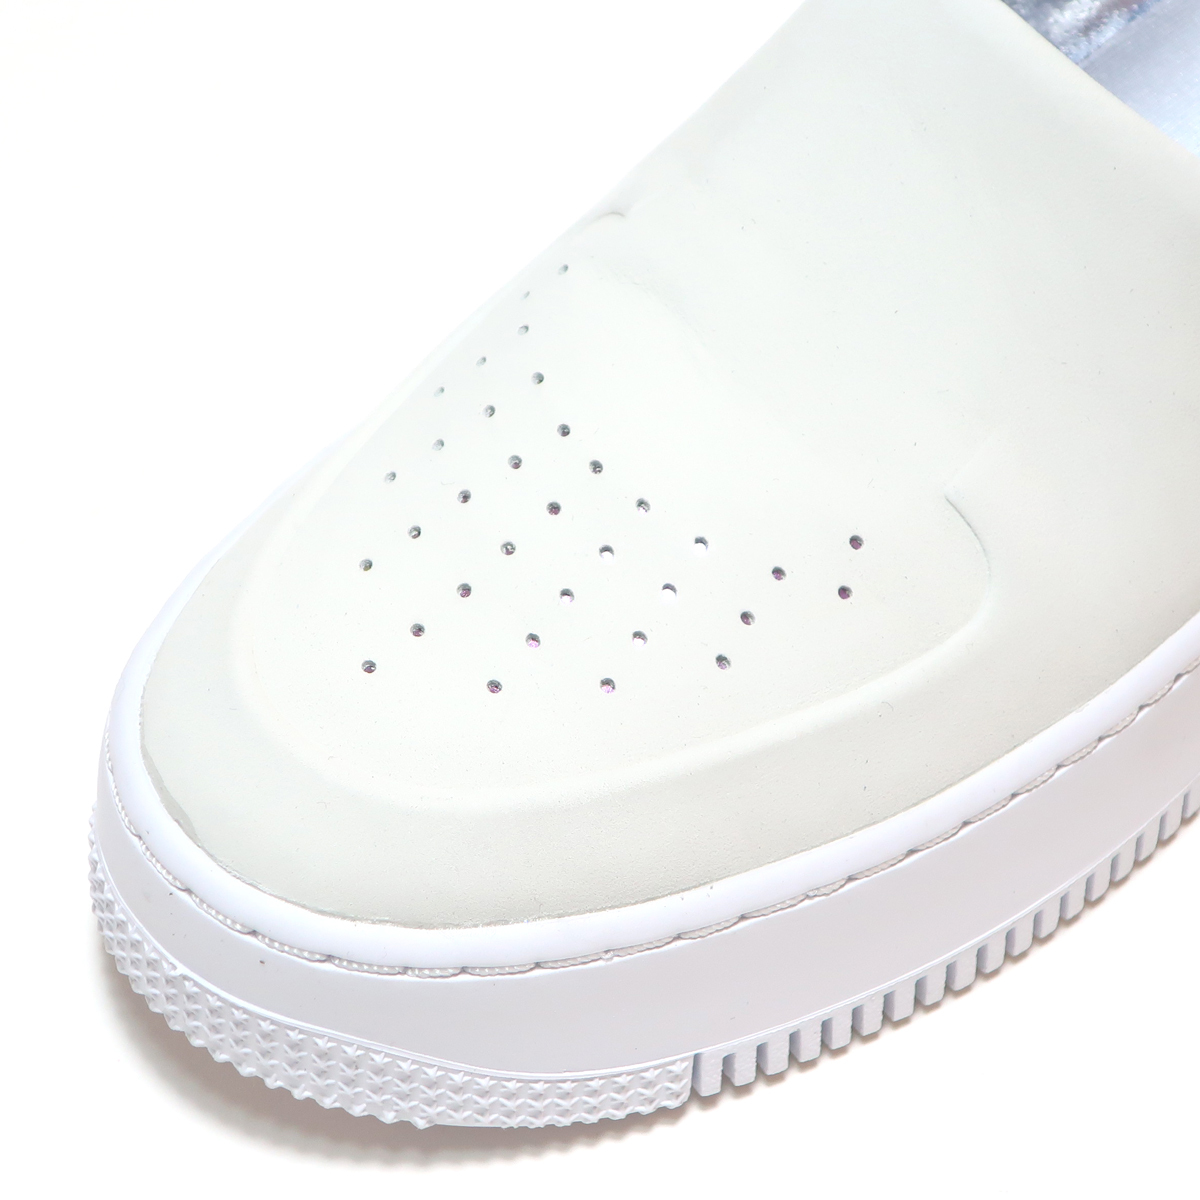 NIKE WMNS AF1 LOVER XX WMNS 24.5cm OFF WHITE/LIGHT SILVER AIR FORCE 1 ( ナイキ ウィメンズ エアフォース1 ラヴァ― オフホワイト )_画像7